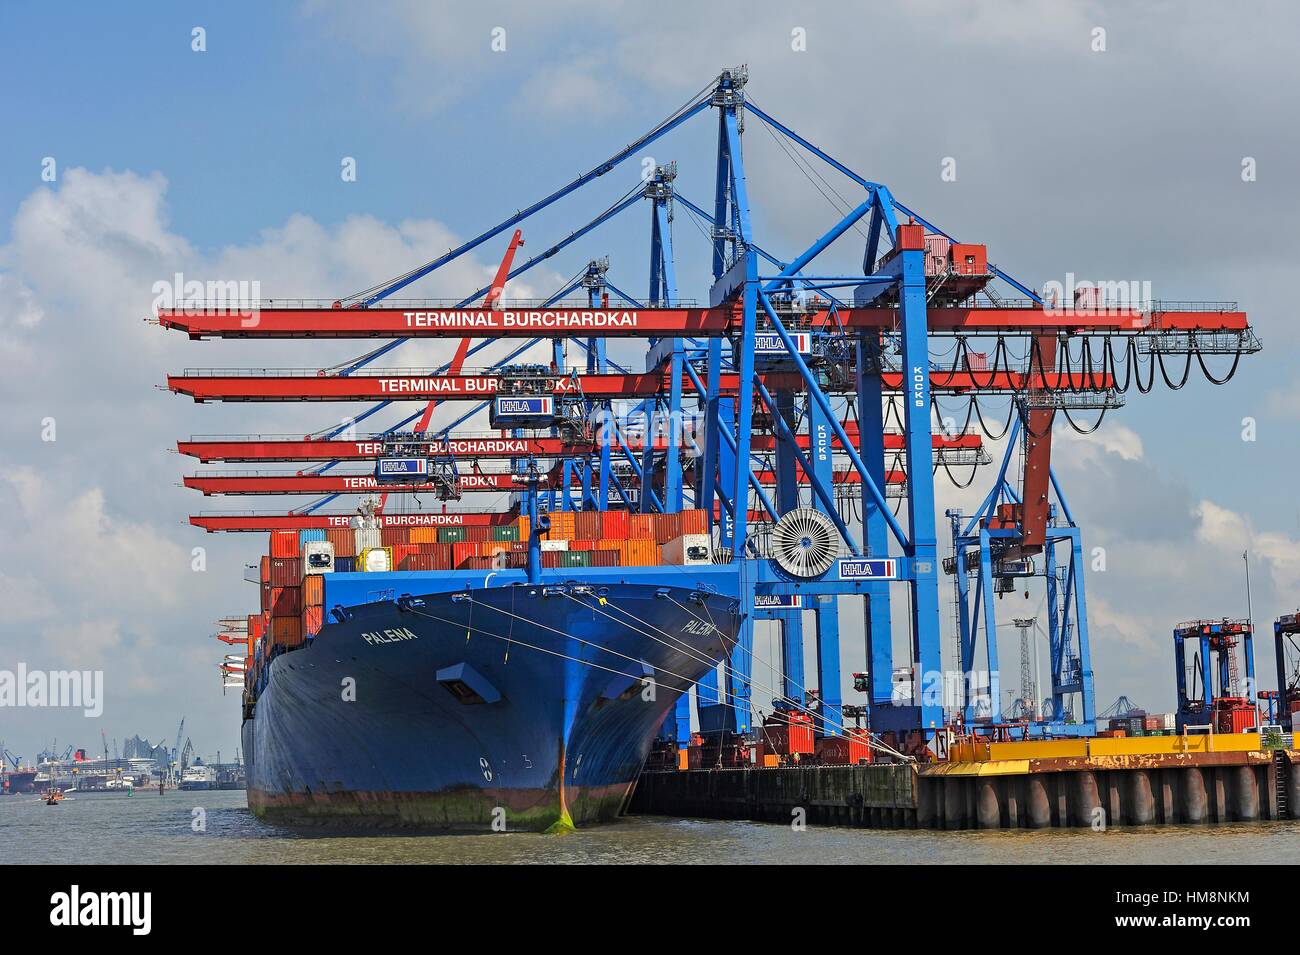 container ship Palena in the Port of Hamburg, Germany, Europe. Stock Photo